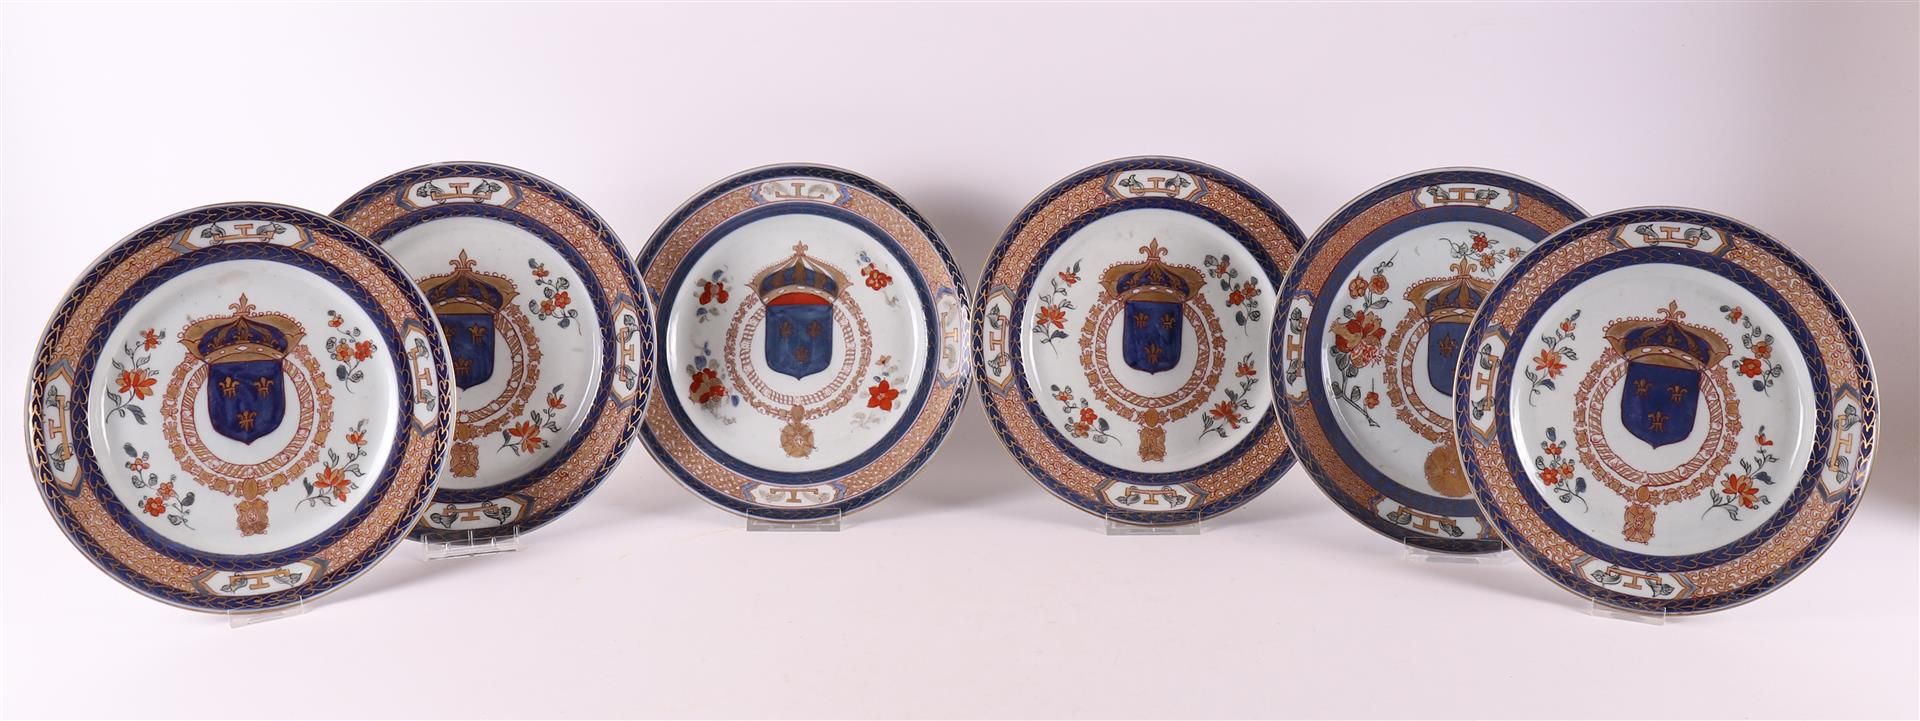 A series of ze porcelain coats of arms, France, Samson 19th century. Blue/red, partly gold-